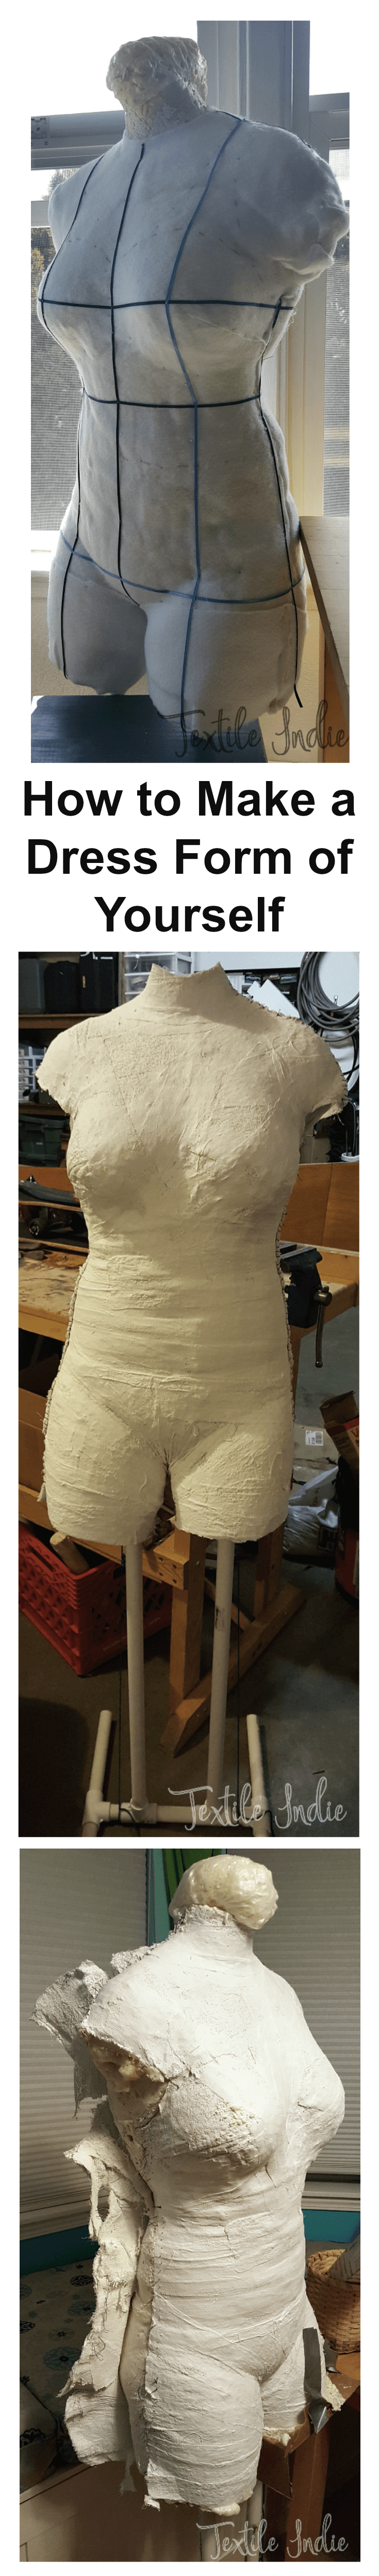 How to make a dress form of yourself so that you can create clothes that actually fit.